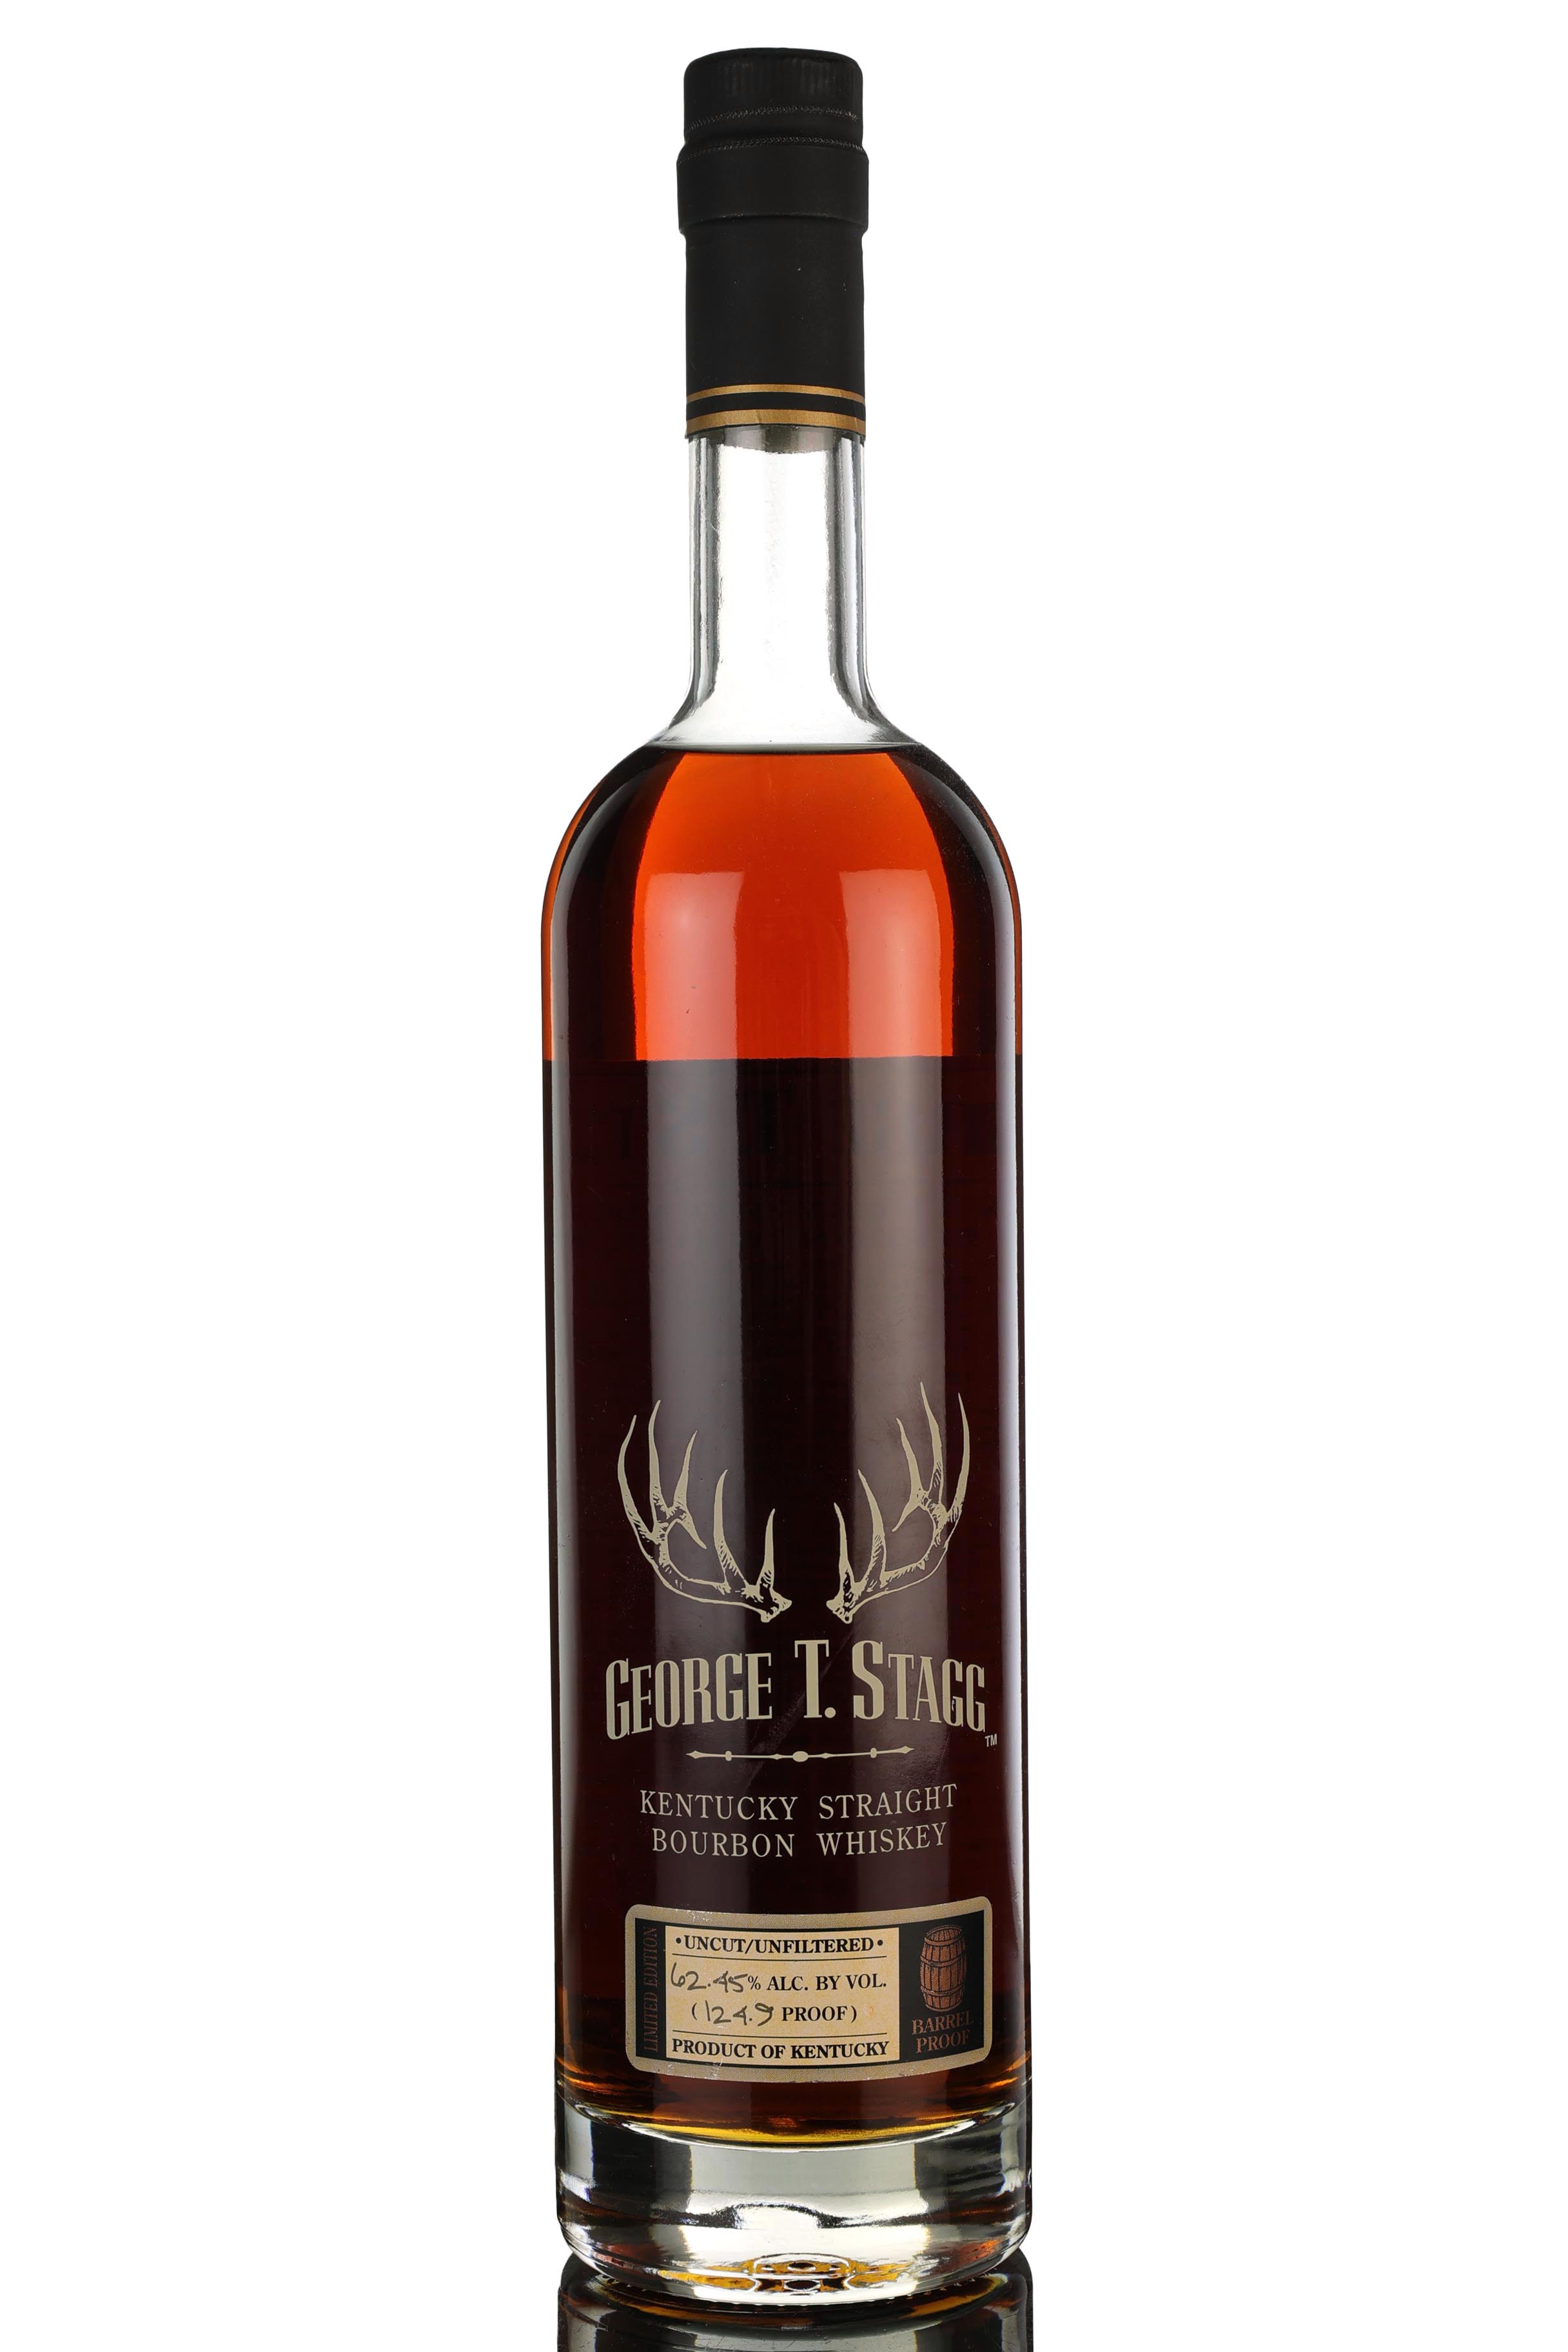 George T Stagg 2003 - 15 Year Old - 2018 Release - Barrel Proof 62.45%